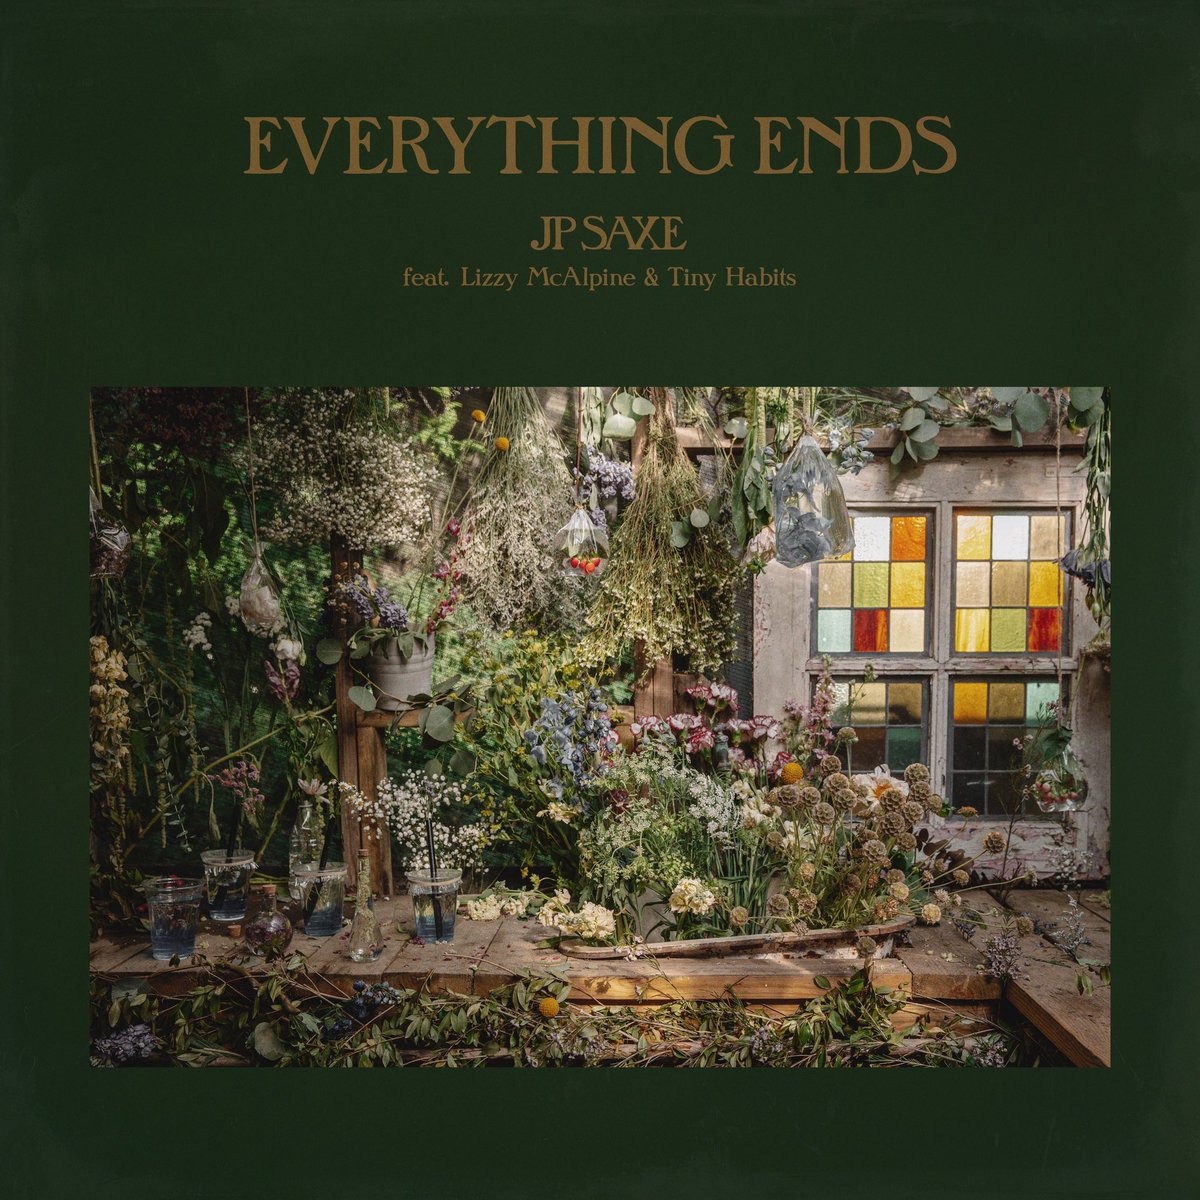 EVERYTHING ENDS out now go listen to our song about nostalgia and trauma bonding and cute puppies. @LizzyMcAlpine @tinyhabs listen: jpsaxe.lnk.to/EverythingEnds watch: JPSaxe.lnk.to/EEvideo